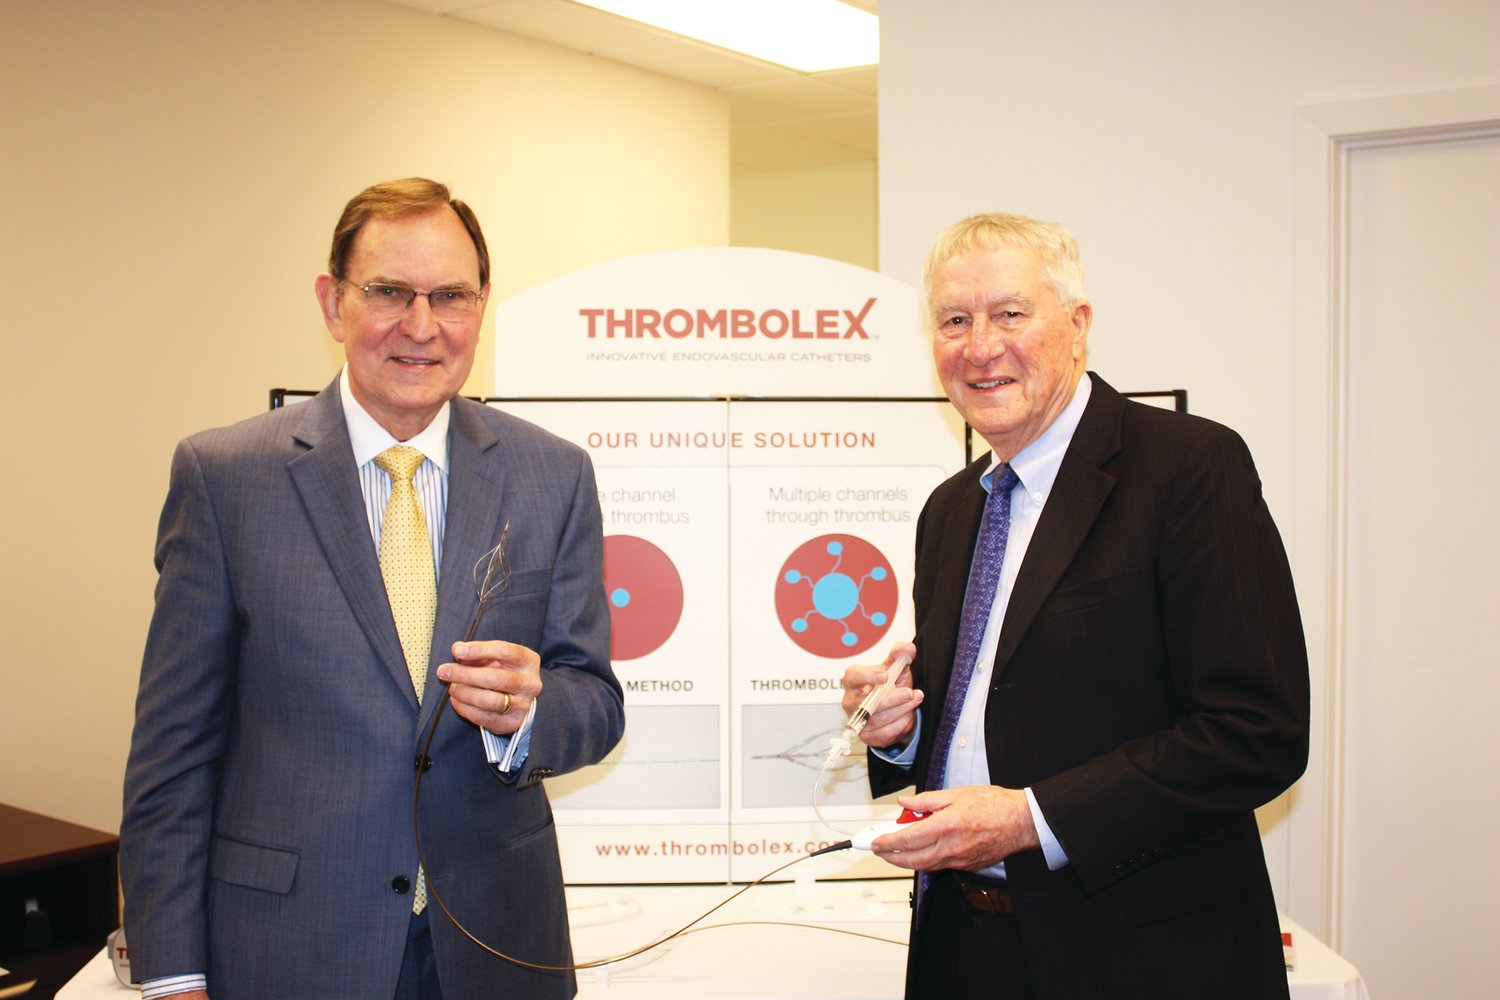 Dr. Brian G. Firth, chief scientific officer, Thrombolex, left, and Marvin Woodall, chairman and CEO, Thrombolex, hold up the company’s new medical device. Photograph by Jodi Spiegel Arthur.